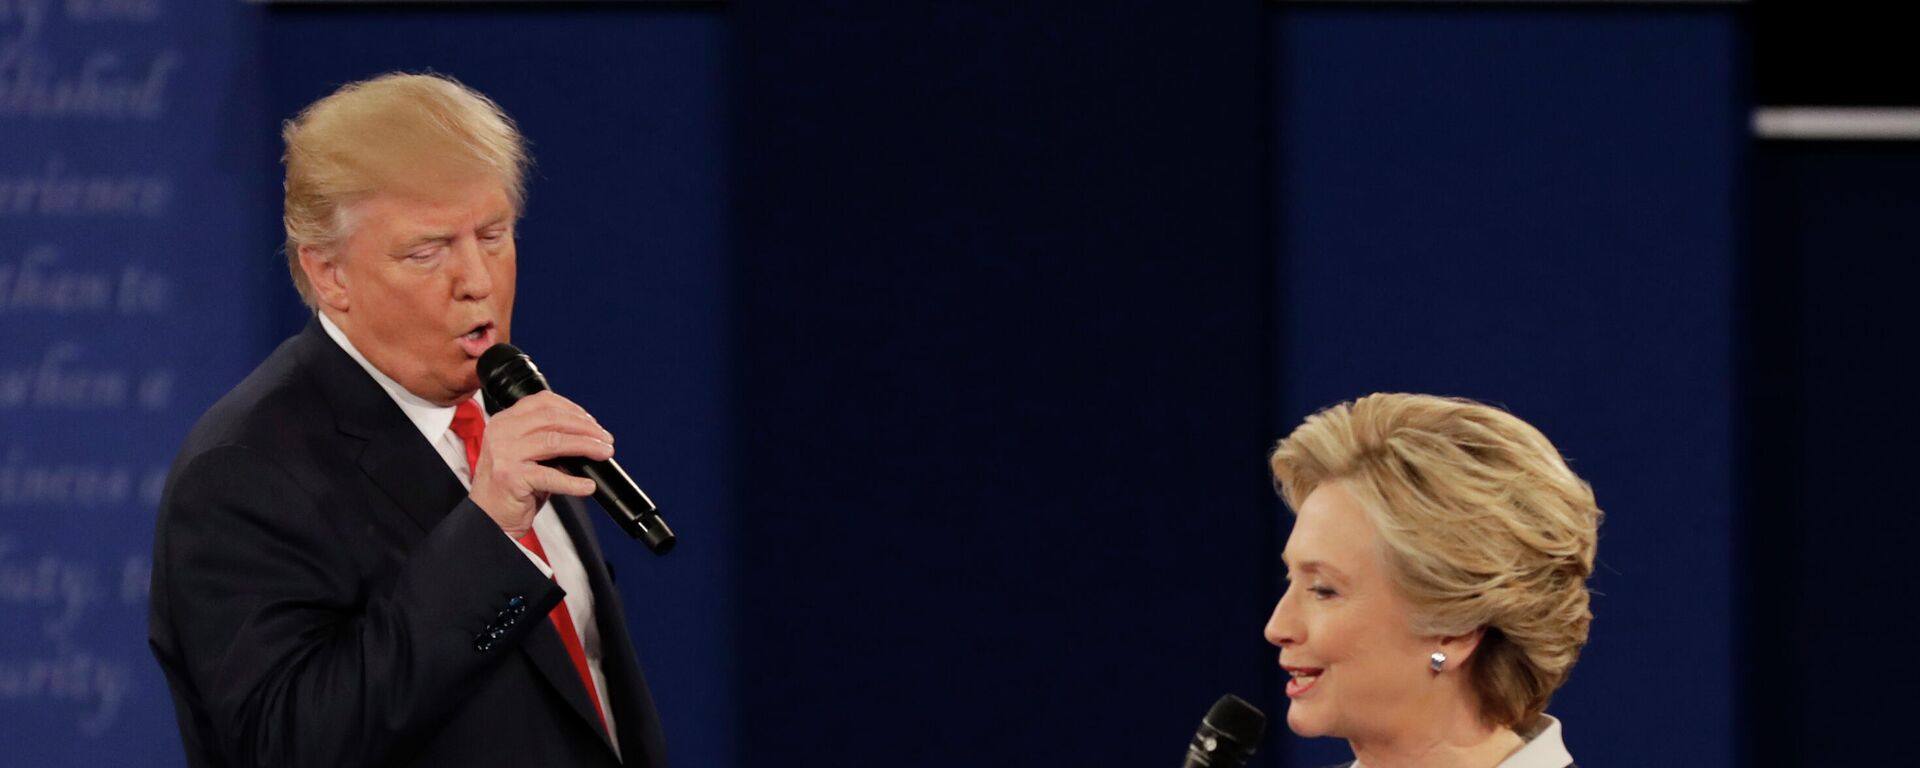 In this Oct. 9, 2016, file photo Republican presidential nominee Donald Trump and Democratic presidential nominee Hillary Clinton speak during the second presidential debate at Washington University in St. Louis. - Sputnik International, 1920, 19.05.2022